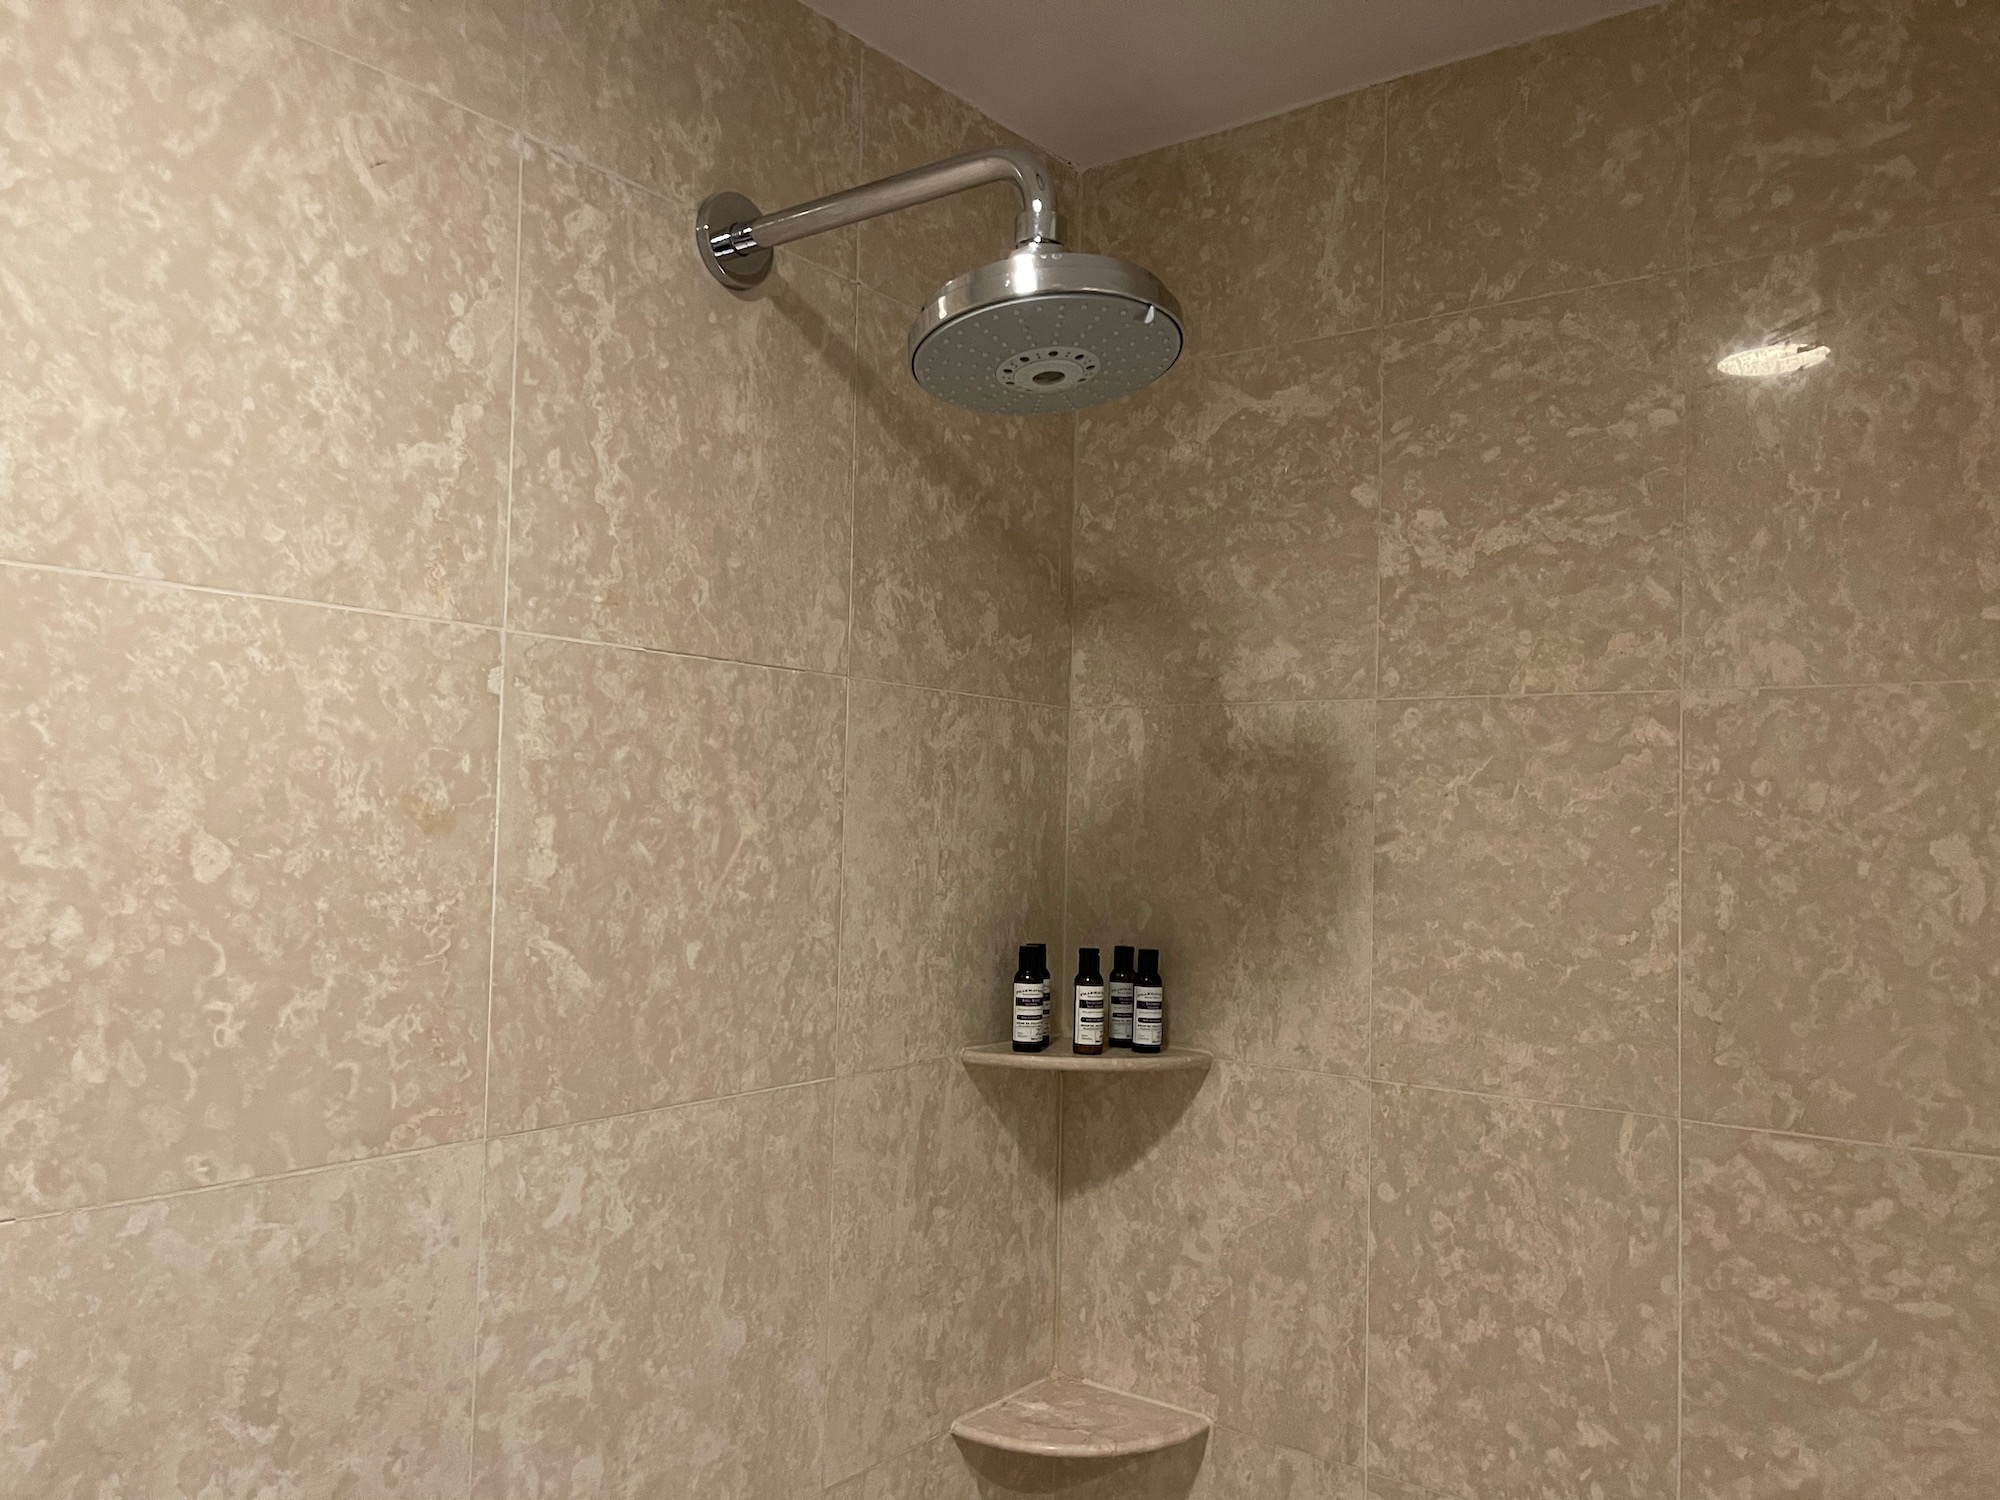 a shower head with bottles on the wall